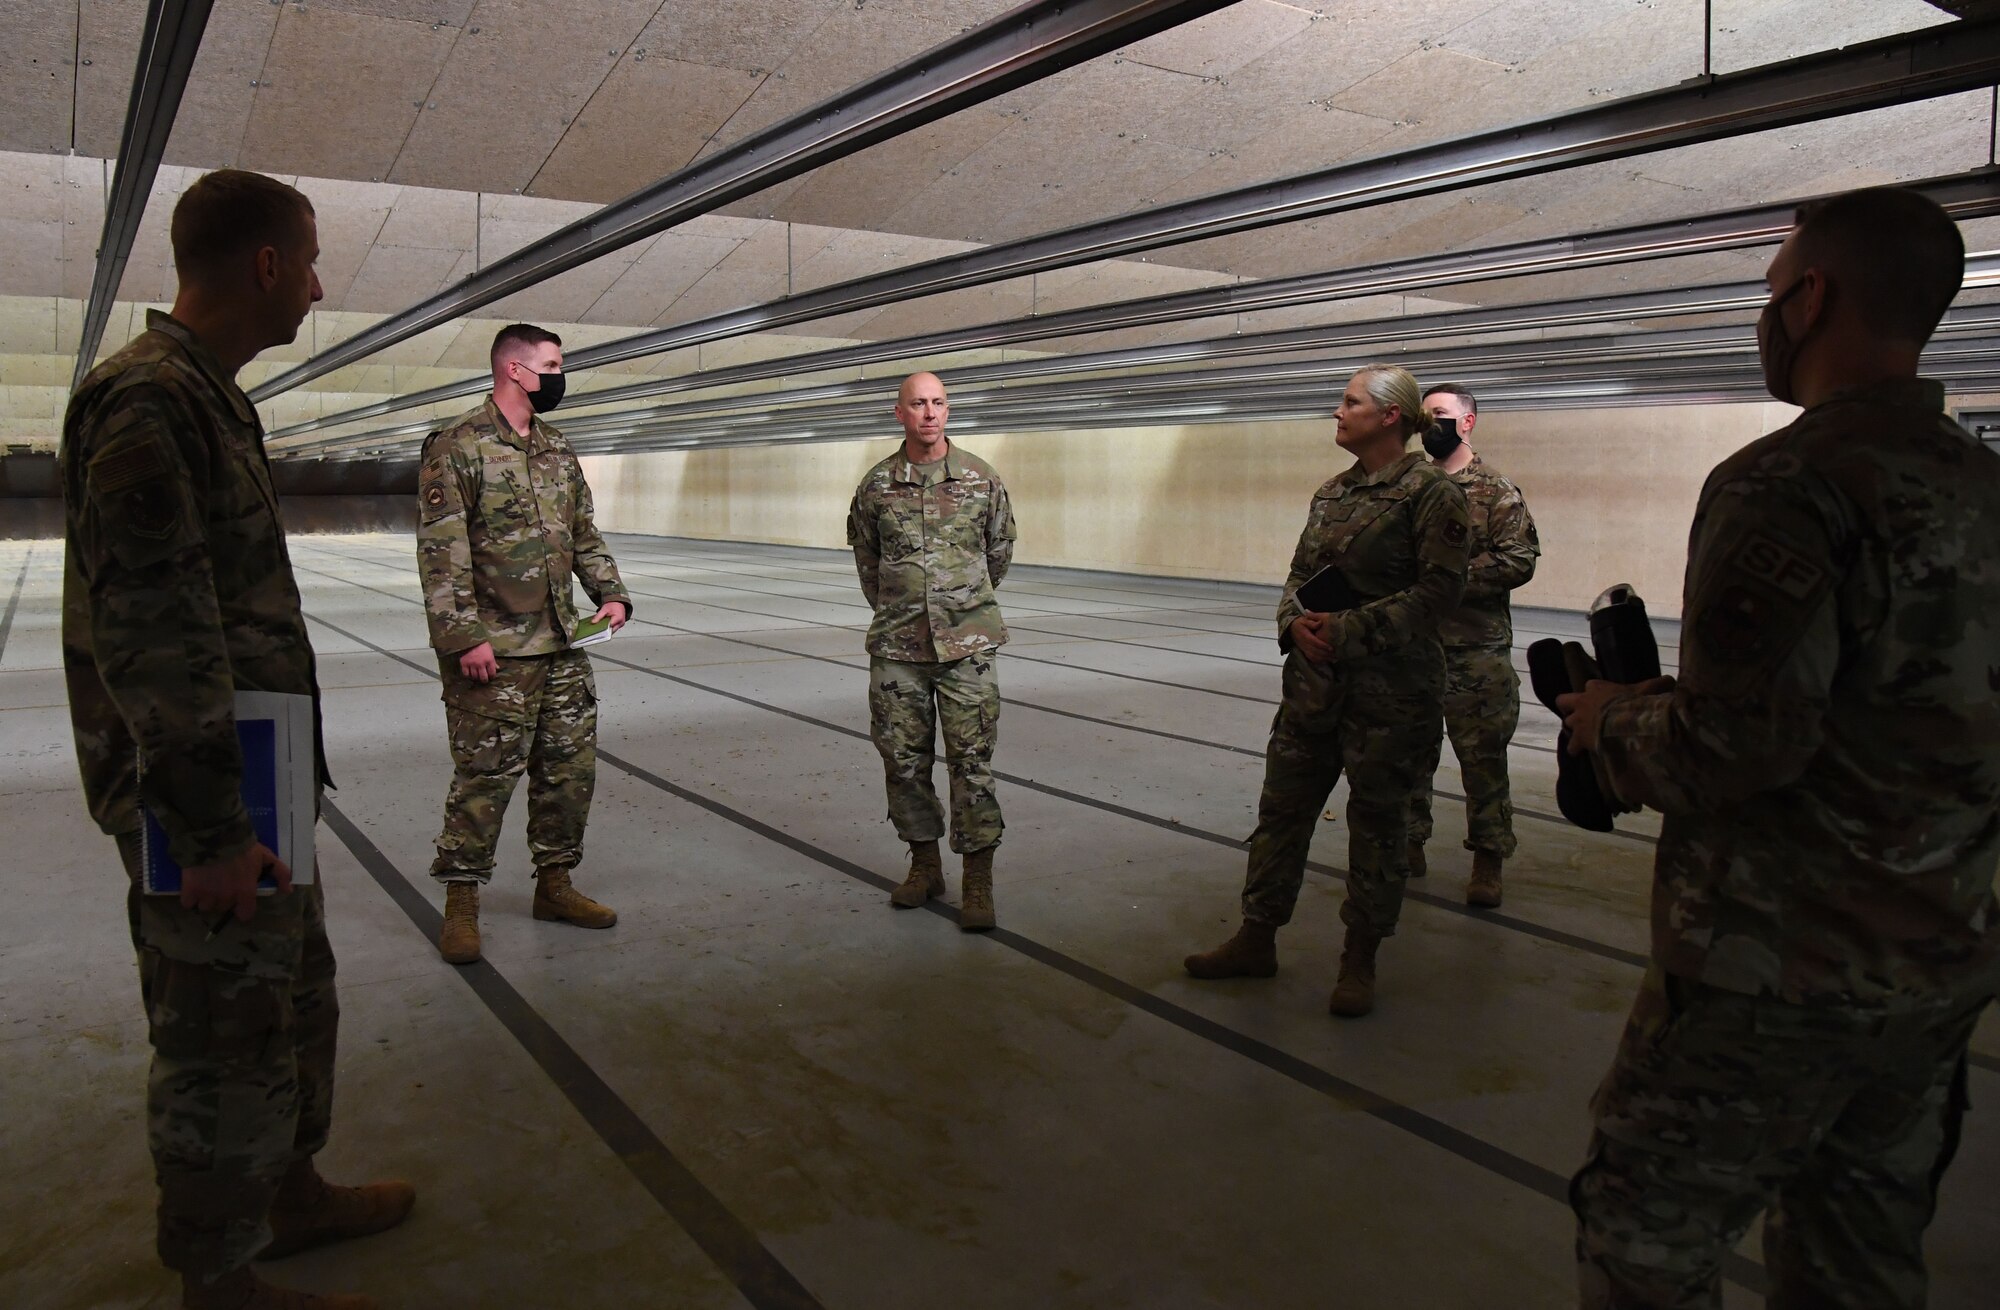 U.S. Air Force Col. William Hunter, 81st Training Wing commander, tours the 81st Security Forces Squadron indoor firing range during an 81st Mission Support Group immersion tour at Keesler Air Force Base, Mississippi, June 24, 2021. The purpose of the tour was to become more familiar with Keesler's mission. (U.S. Air Force photo by Kemberly Groue)